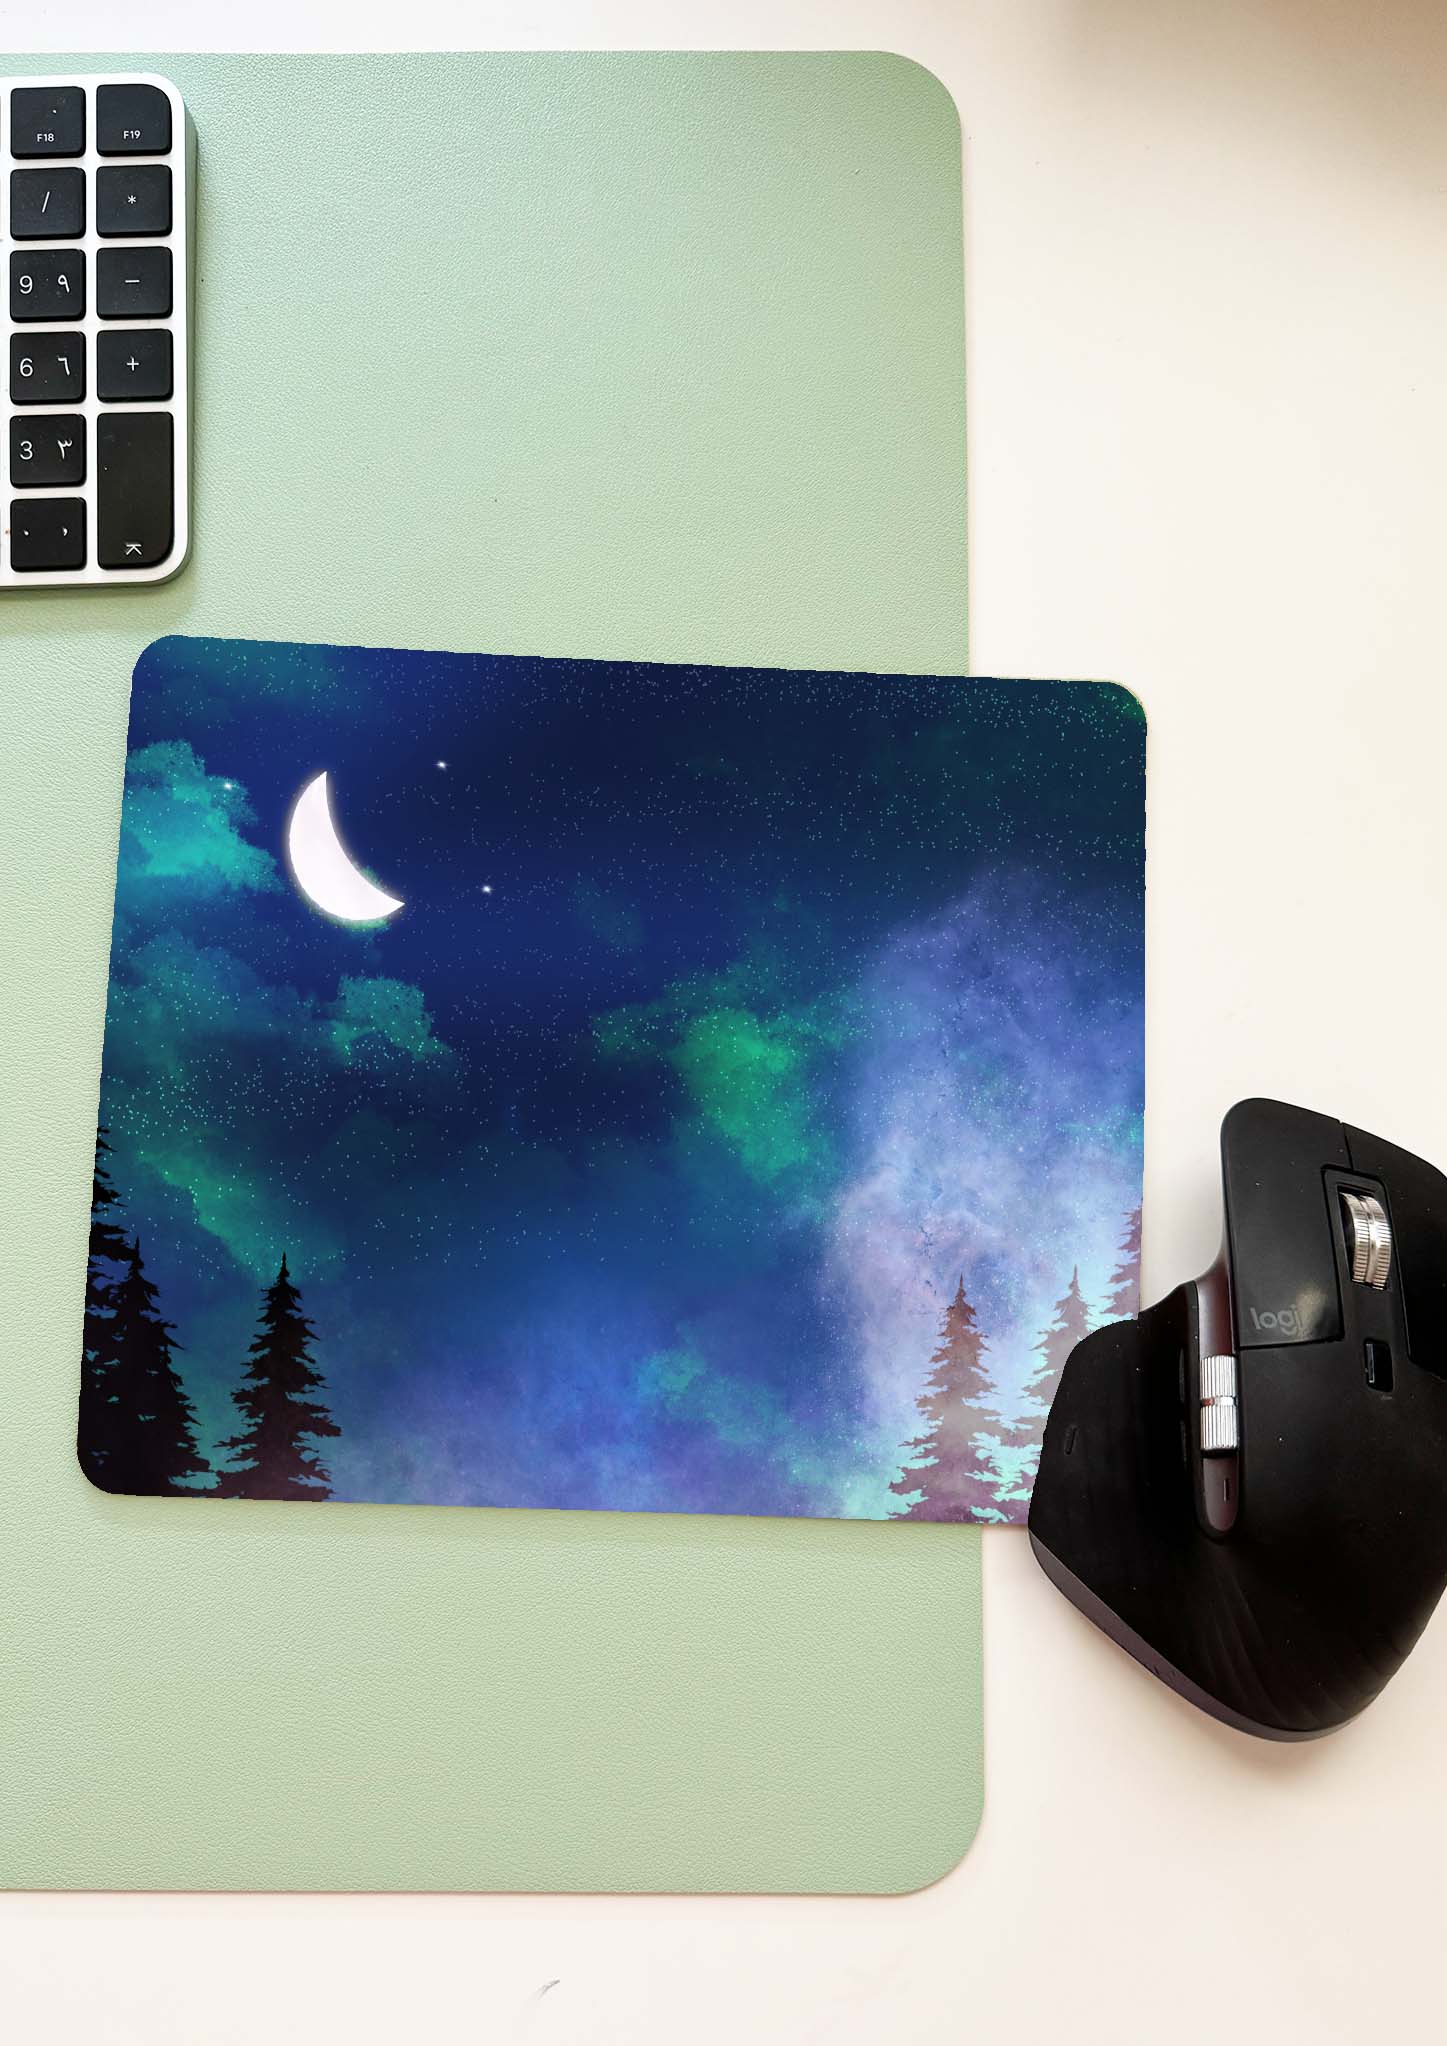 The Night Lights mouse pad